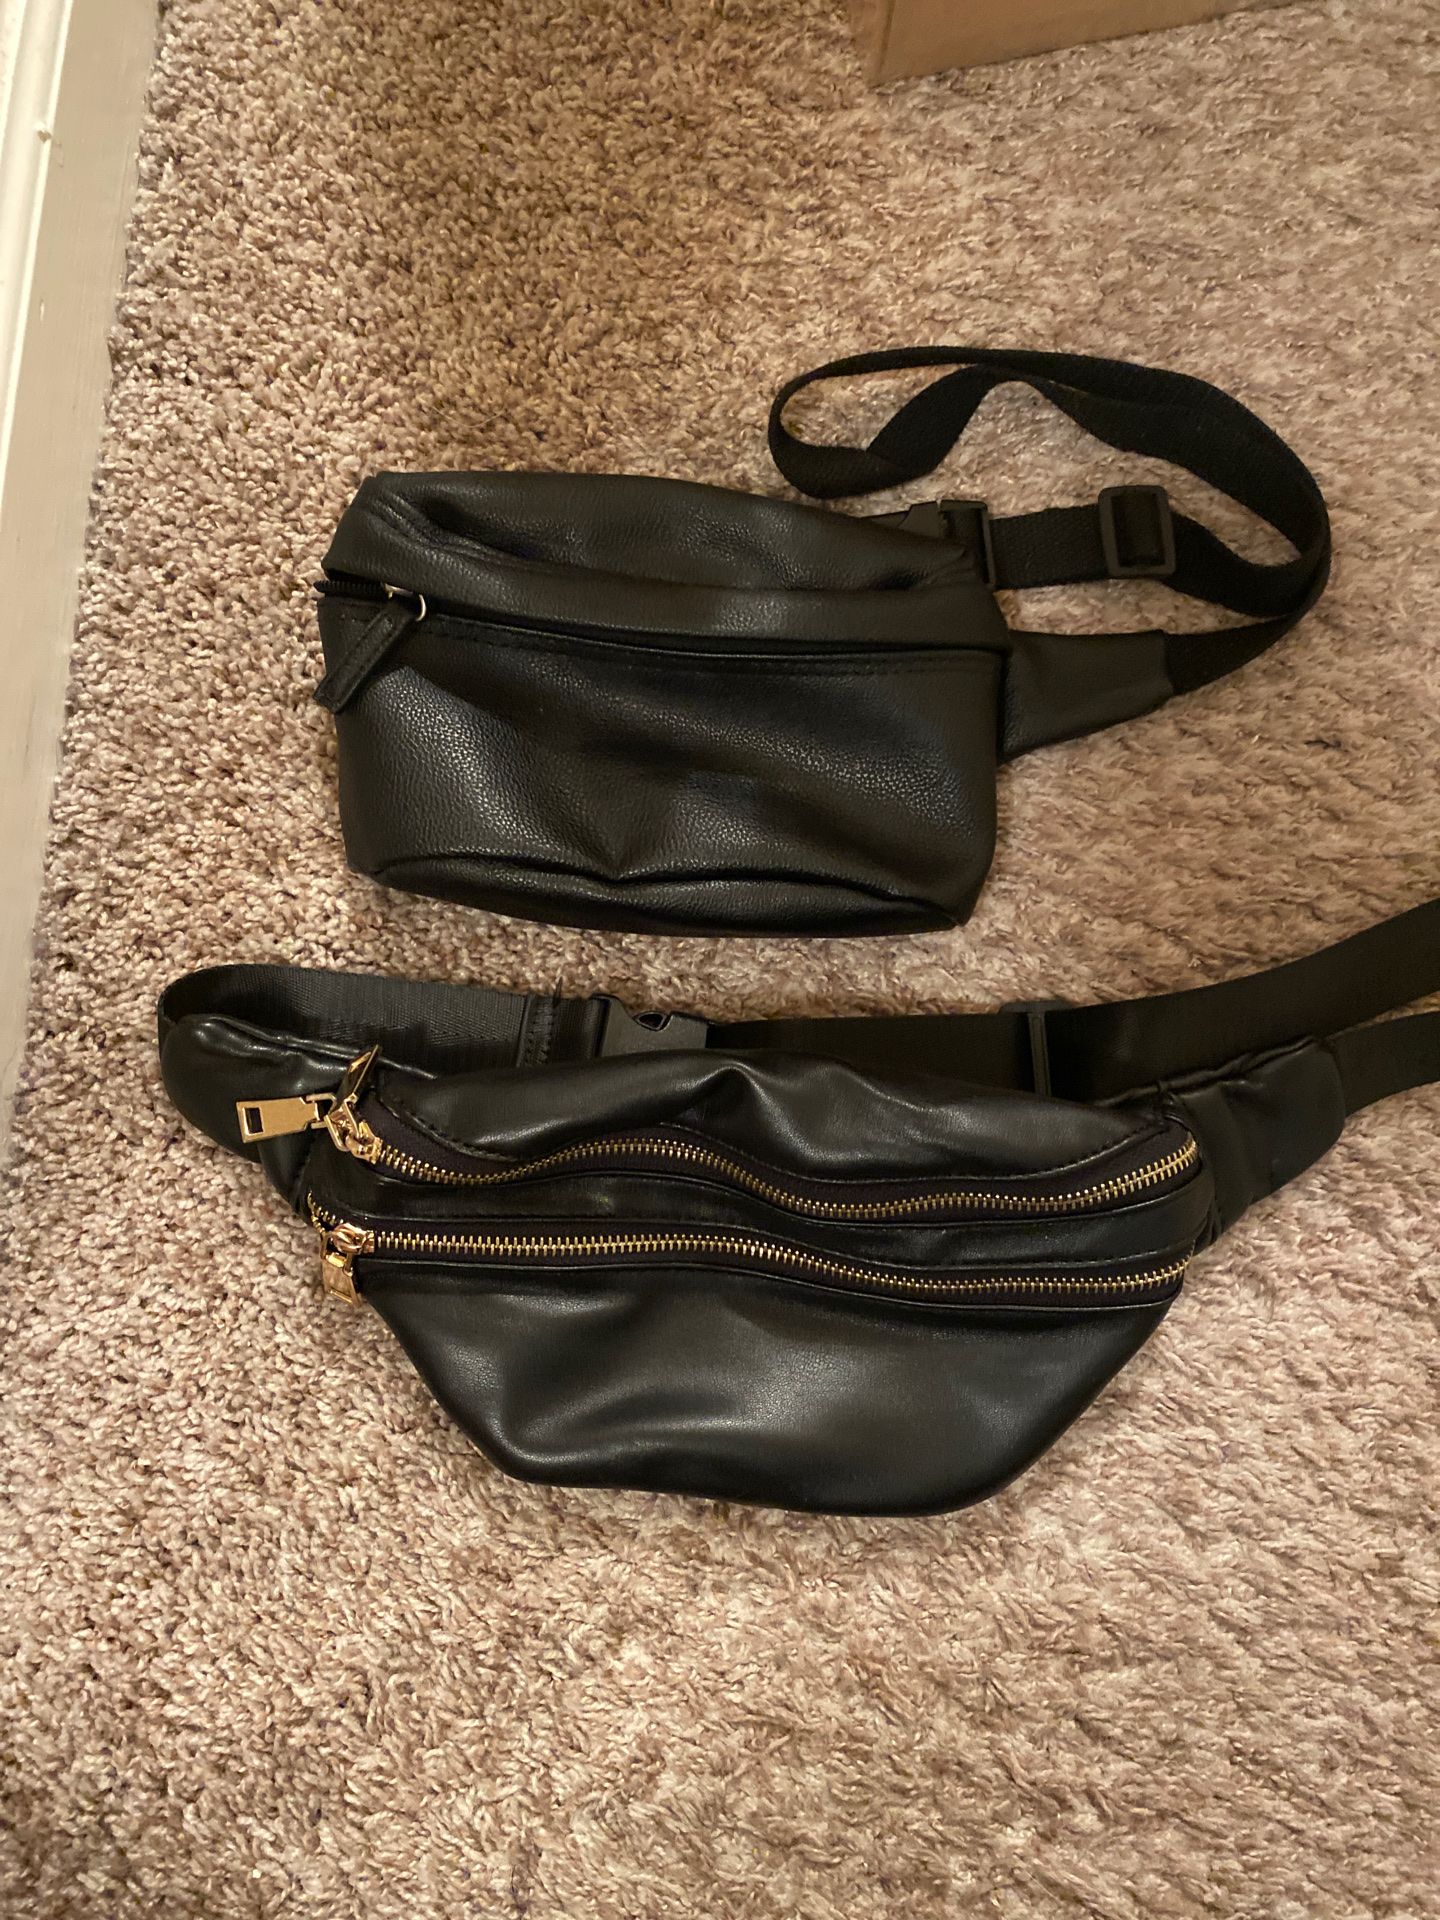 2 waist bags. ($10 for both)